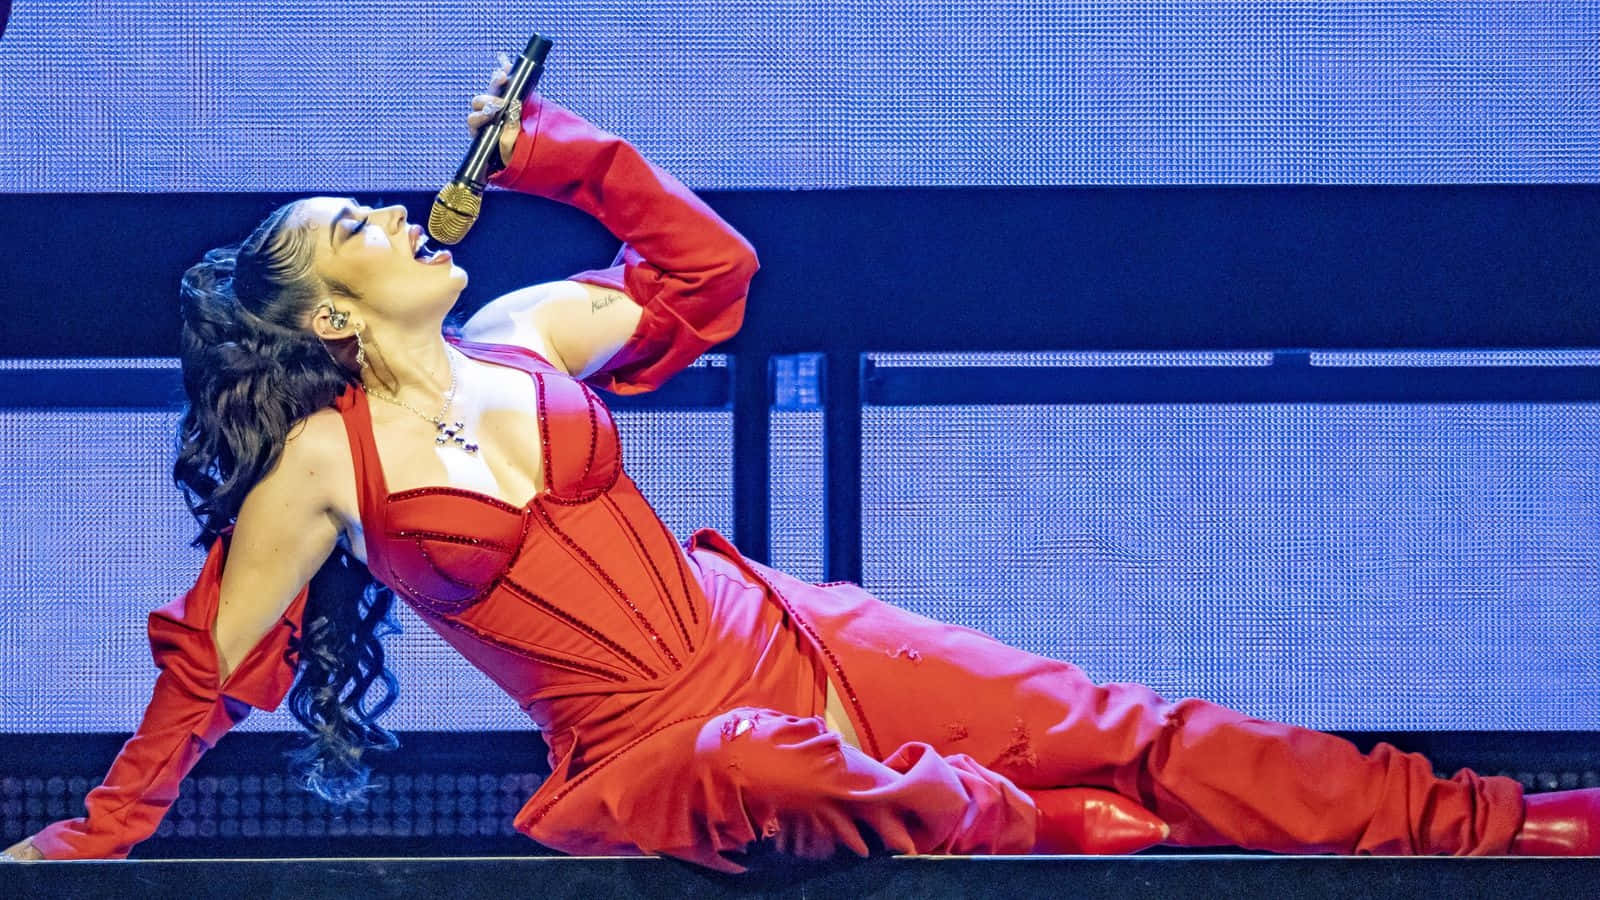 Kali Uchis Red Performance Passion Wallpaper